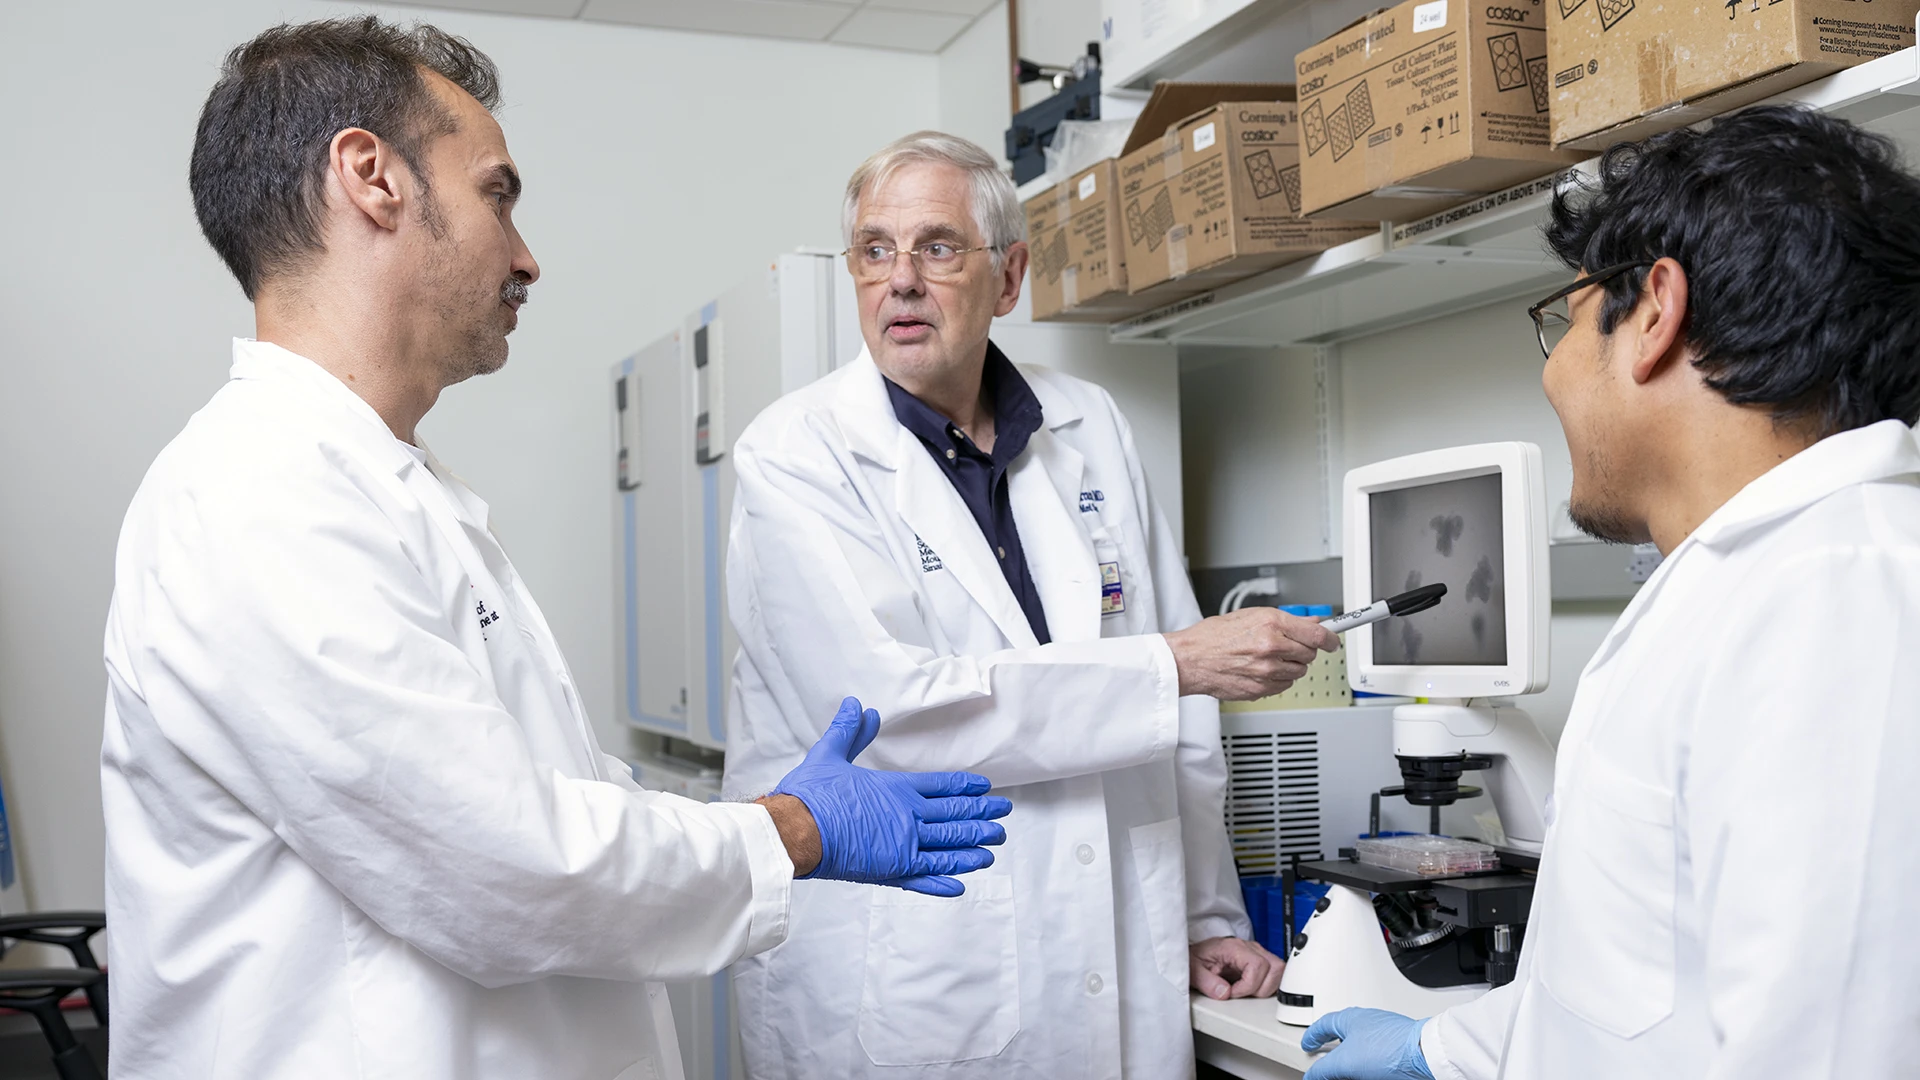 Dr. Ferrara (center) with team members Mariano Acosta Prado, PhD (left), and lab manager George Morales (right). Several clinical trials are underway, conducted as part of the Mount Sinai Acute GVHD International Consortium (MAGIC).